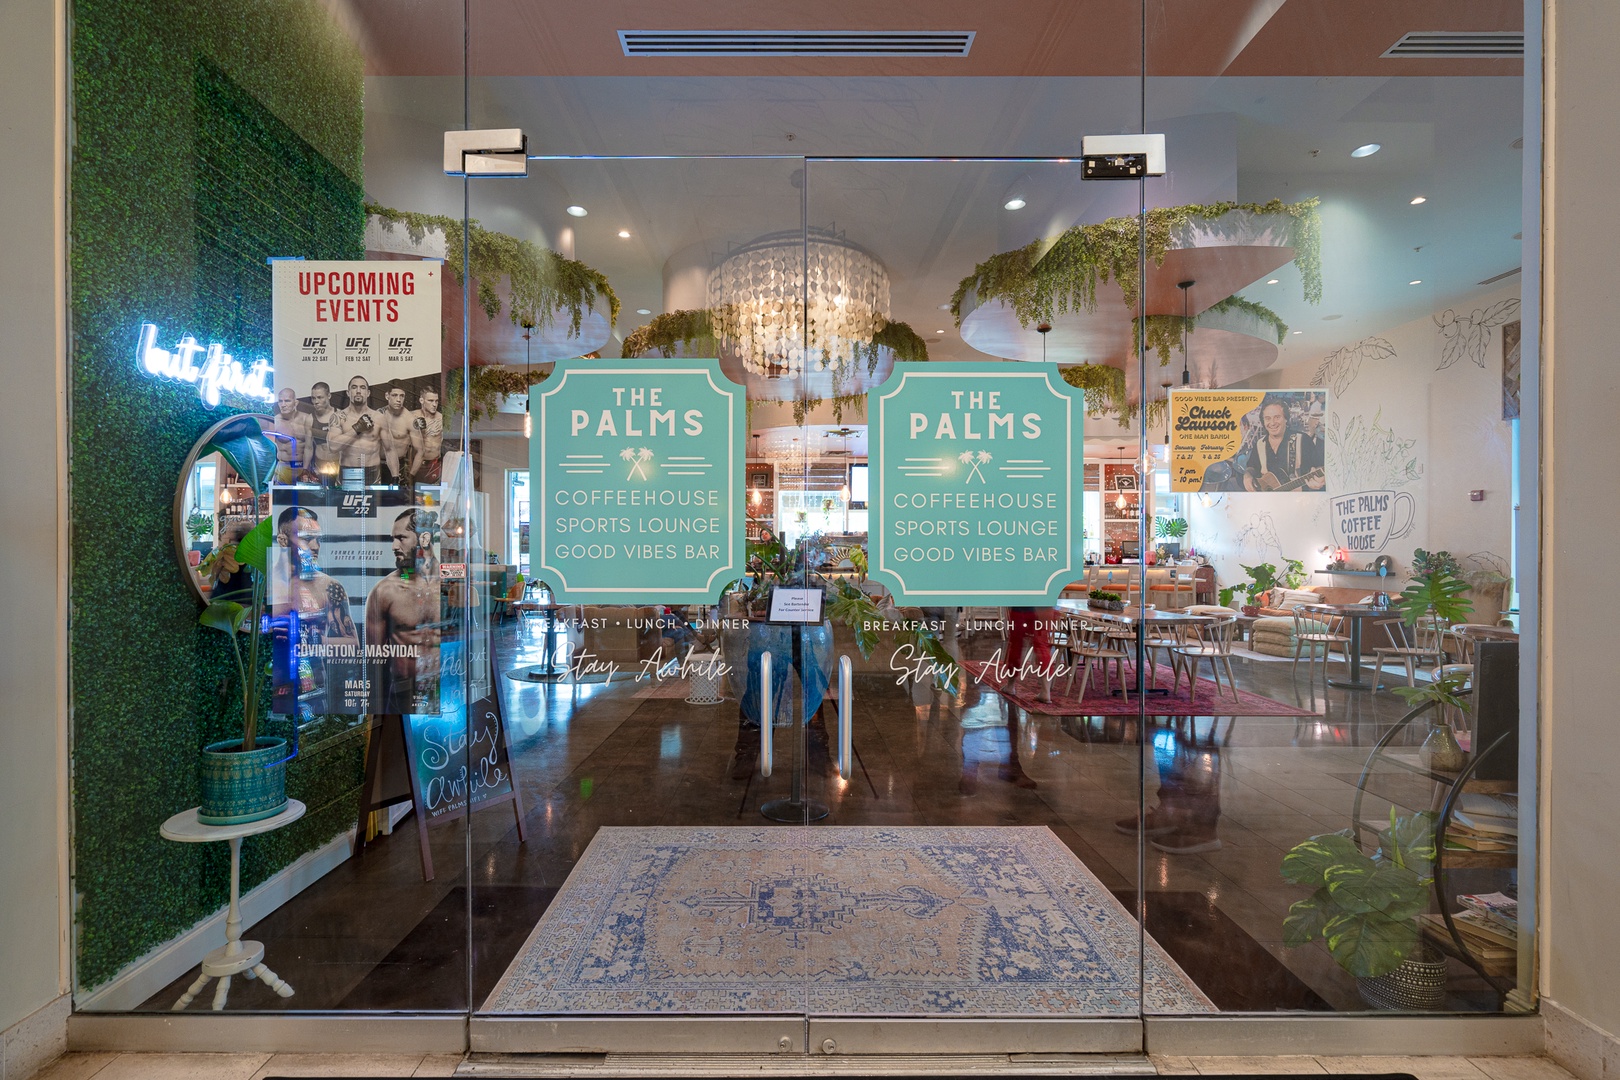 Escape the kitchen and savor a meal at The Palms restaurant